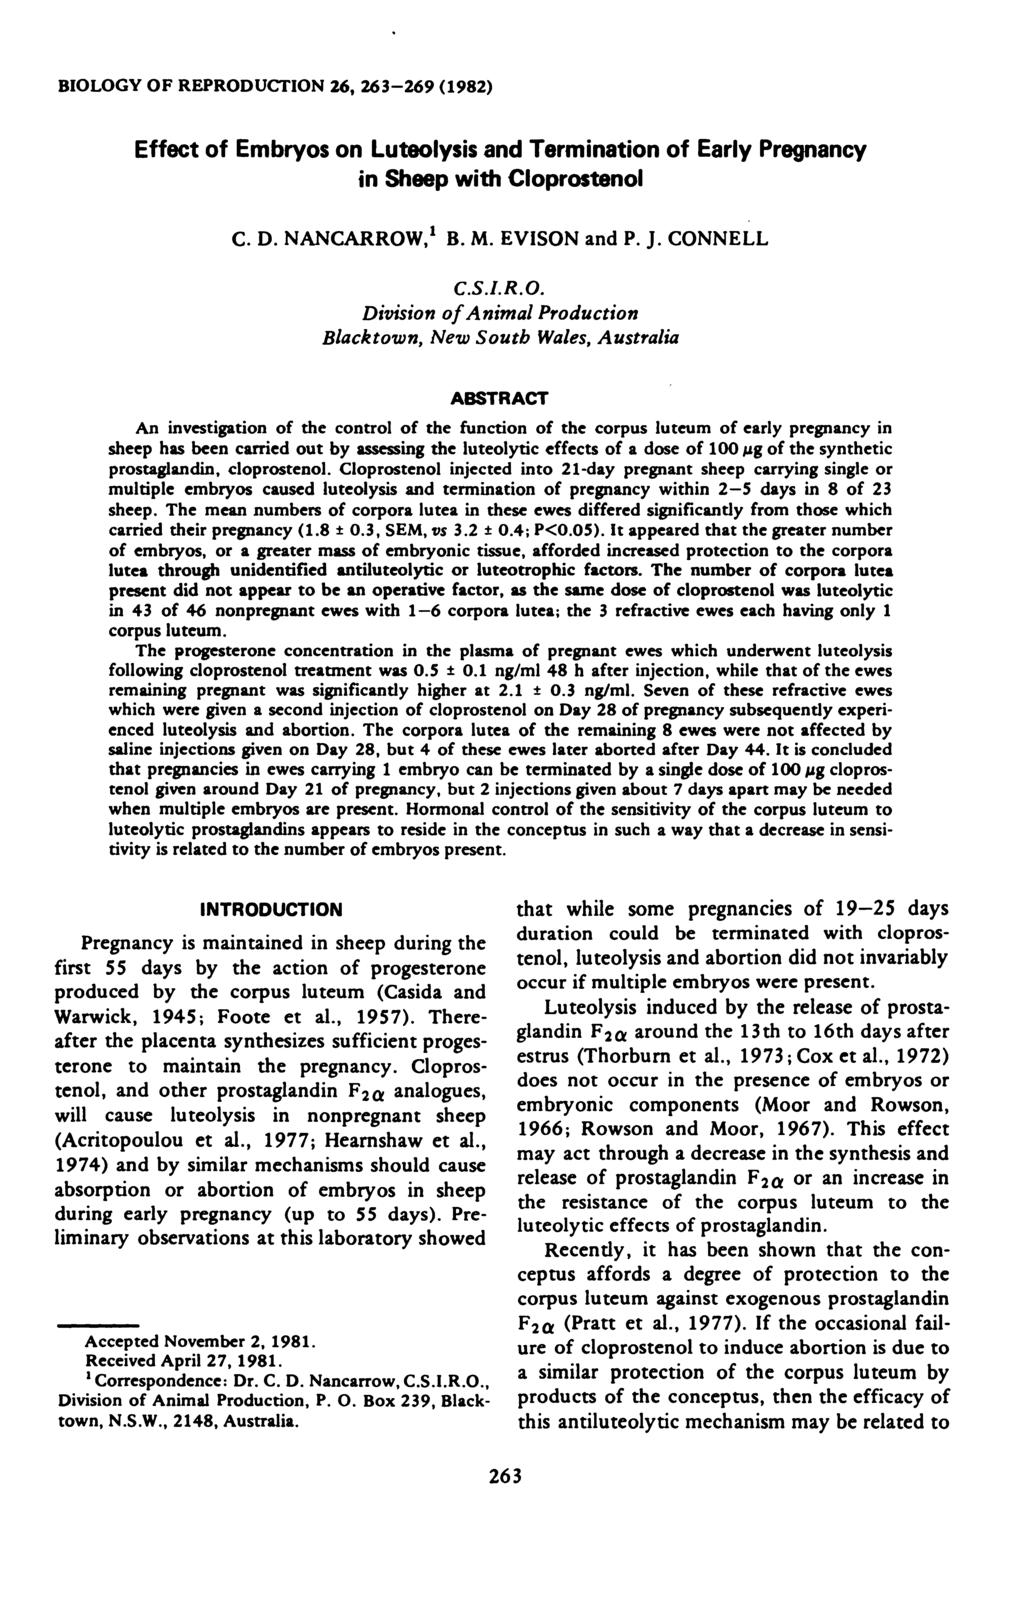 BOLOGY OF REPRODUTON 26, 26-269 (1982) Effect of Embryos on Luteolysis and Termination of Early Pregnancy in Sheep with loprostenol. D. NANARROW,1 B. M. EVSON and P. J. ONNELL.S..R.O. Division